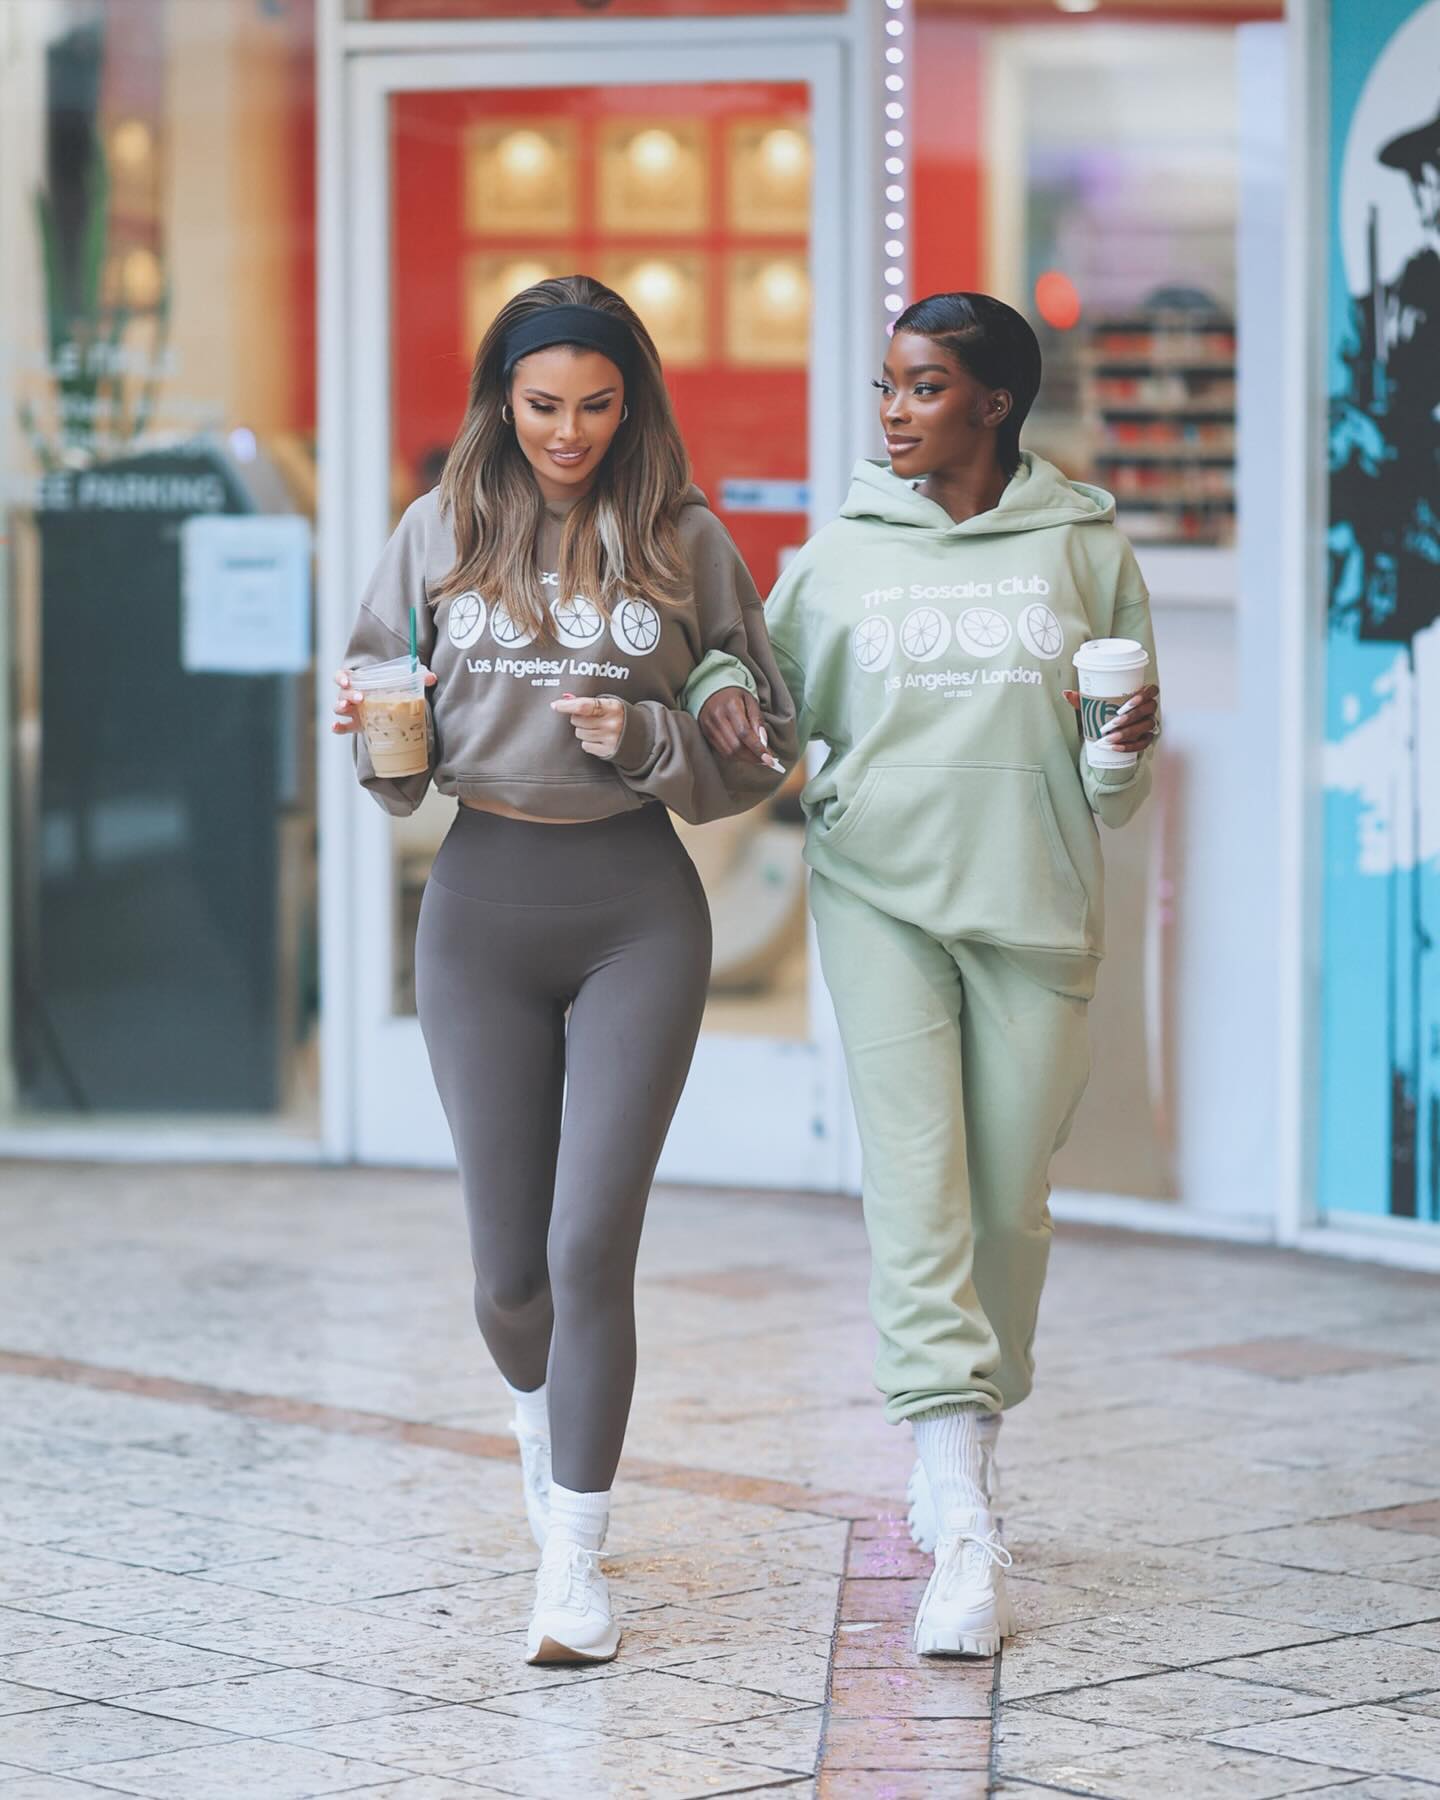 SOSALA, STARBUCKS & MUM CHATS ⭐️⭐️
.
The new collection is so comfy & cute 🥰 
@sosala DROP 2 is NOW LIVE and ready for you to SHOP! 
#AD photo credit - @bobby_pap_la ✔️